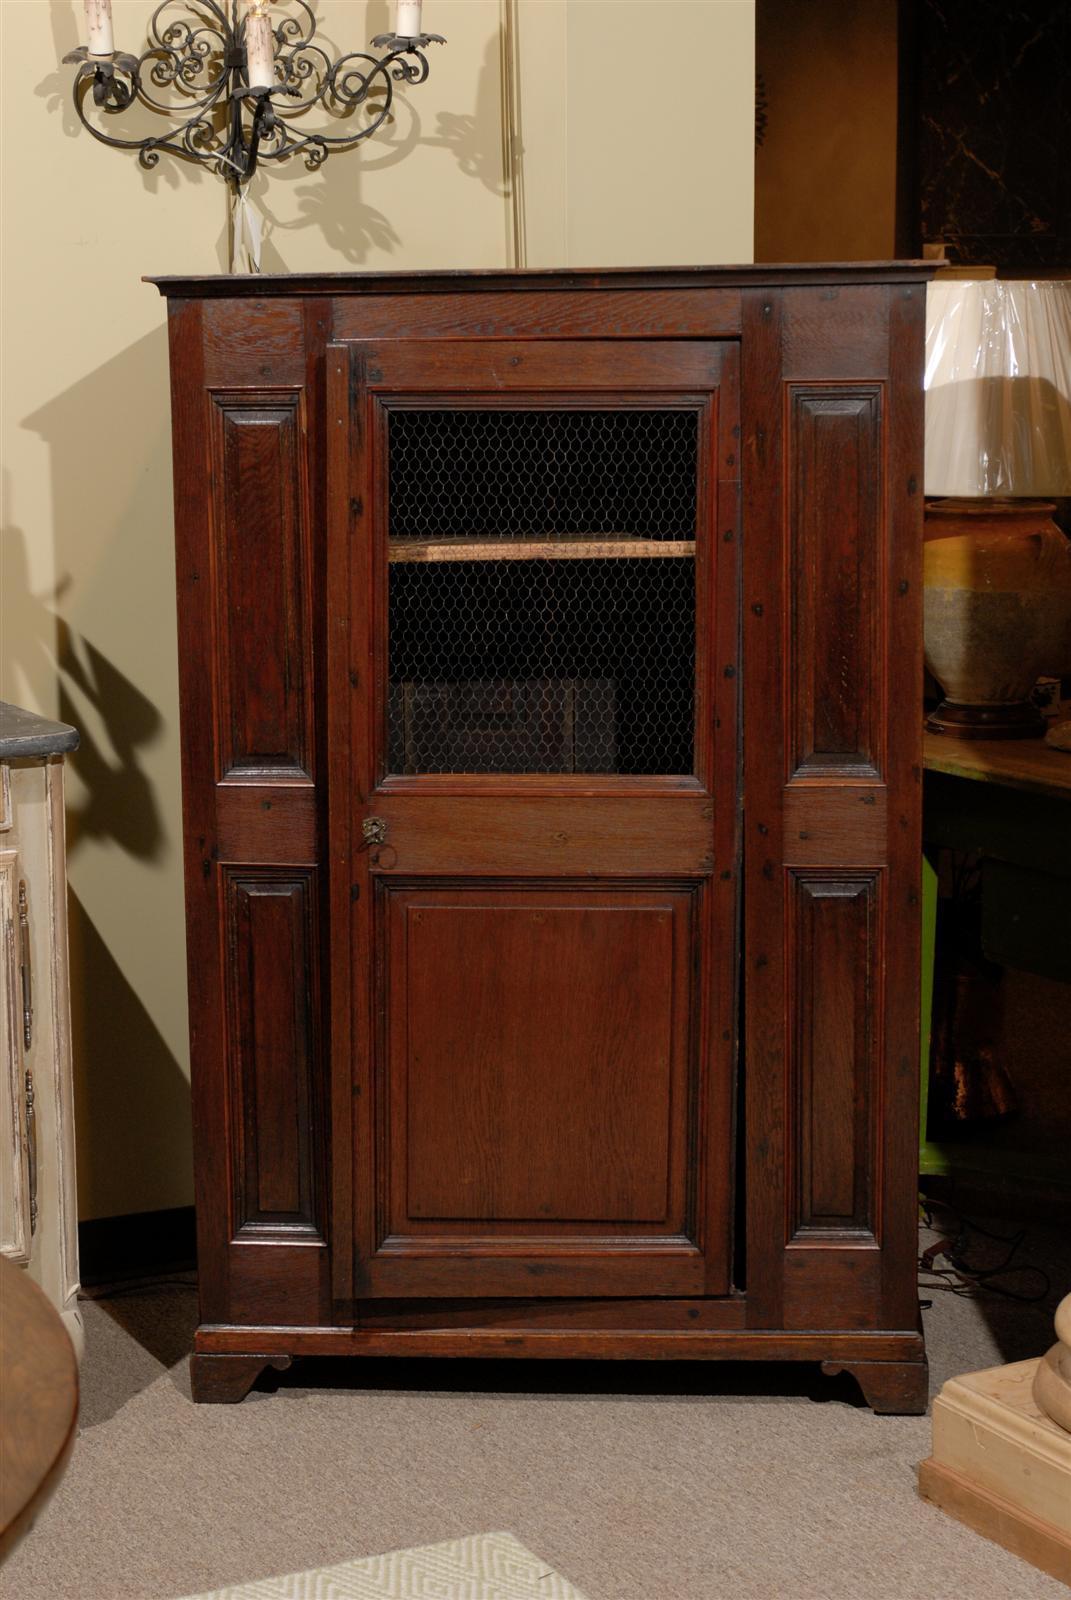 This charming cabinet with the chicken wire door was probably used in a country kitchen somewhere in Brittany. It is narrow in depth but affords great storage. This cute little piece has been made with pine and oak.